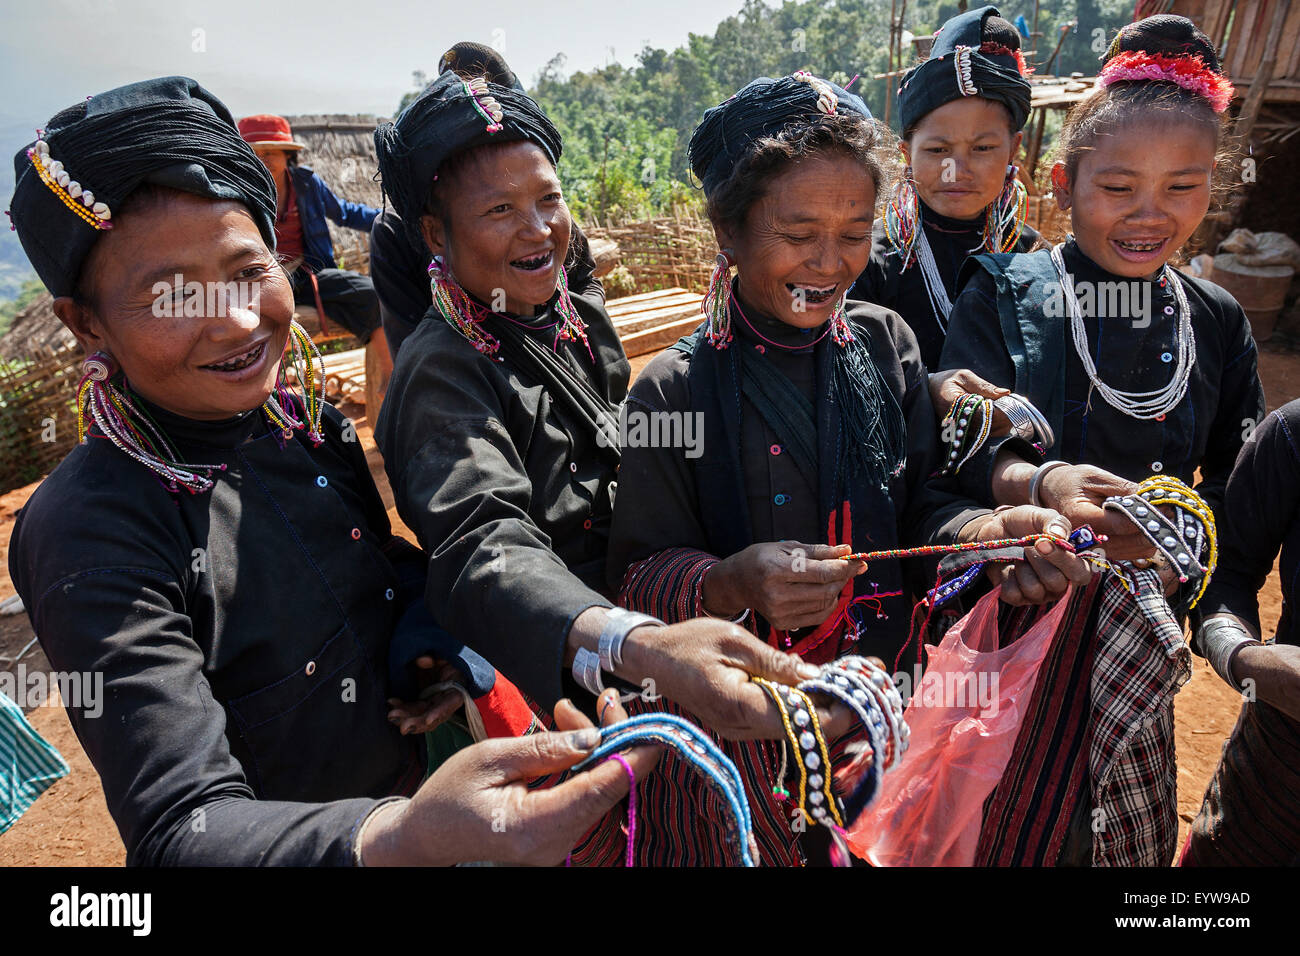 Native woman in typical clothing from the Ann tribe in a mountain village at Pin ropek, offering homemade handicrafts Stock Photo